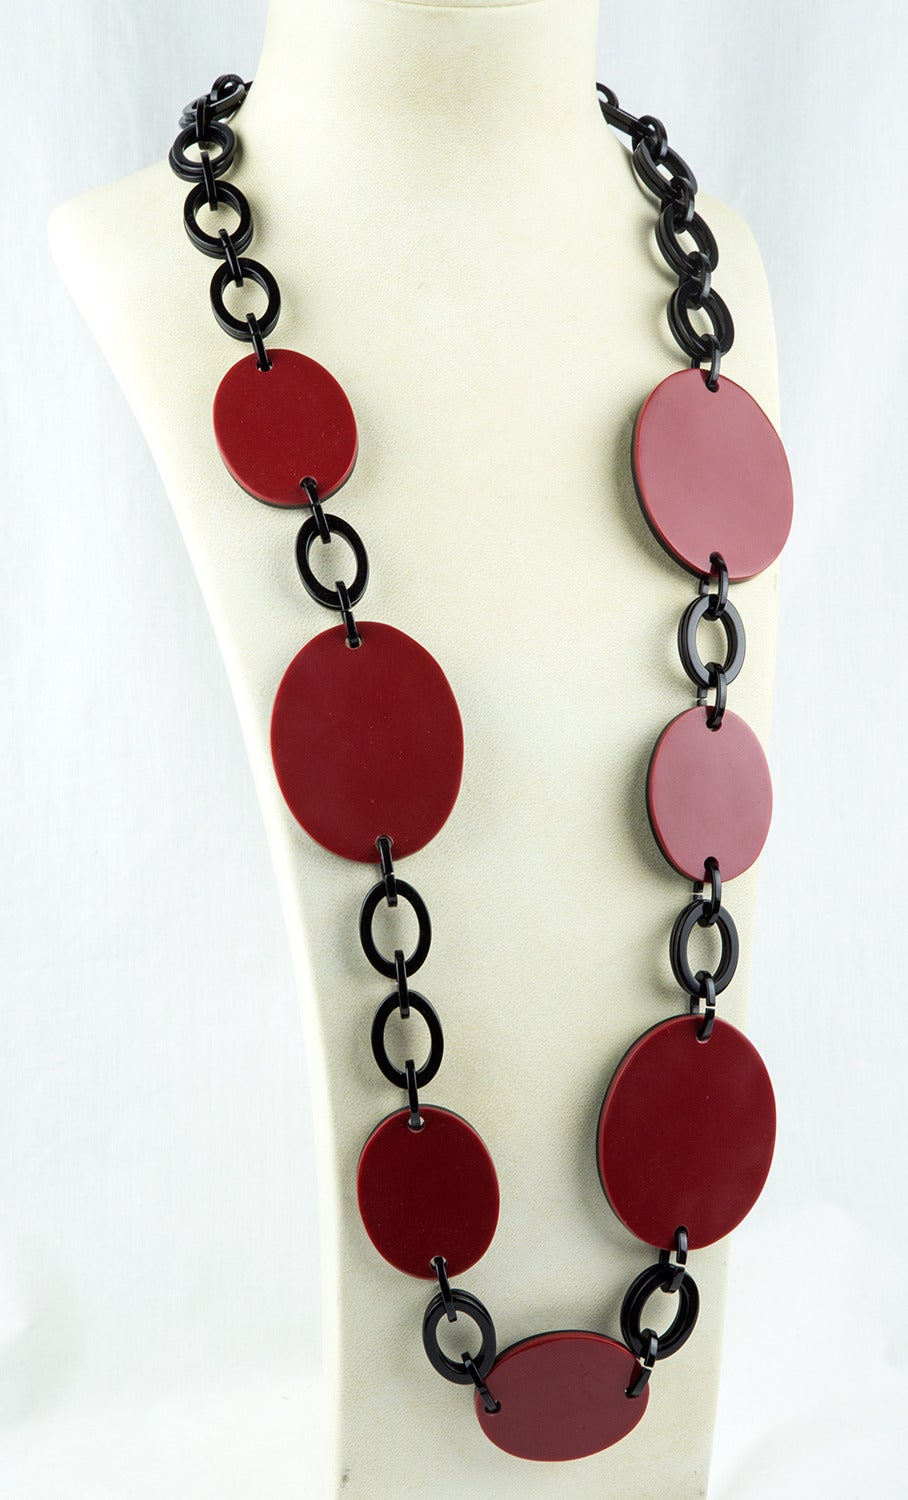 Fabulous! Black and Red Celluloid Disc and double Link Chain Necklace, So Versatile, can be worn as a belt and reverse it and it's all black; oval discs measure approx. 3” x 2.25” and 2” x 1.5”. Approx. total length: 40